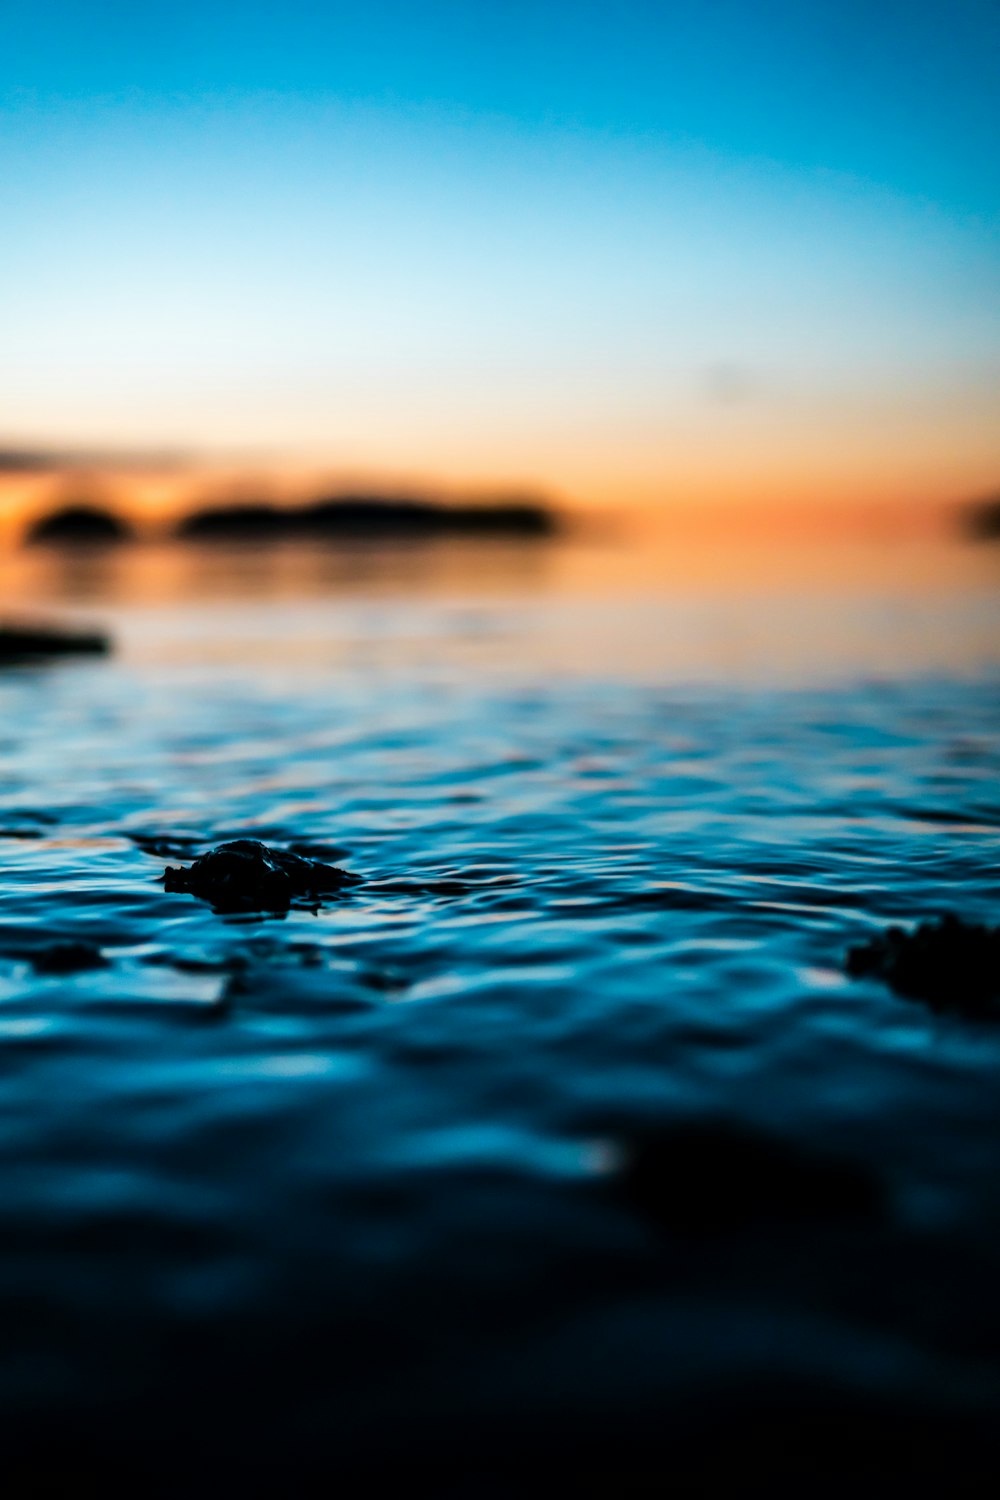 water on body of water during sunset